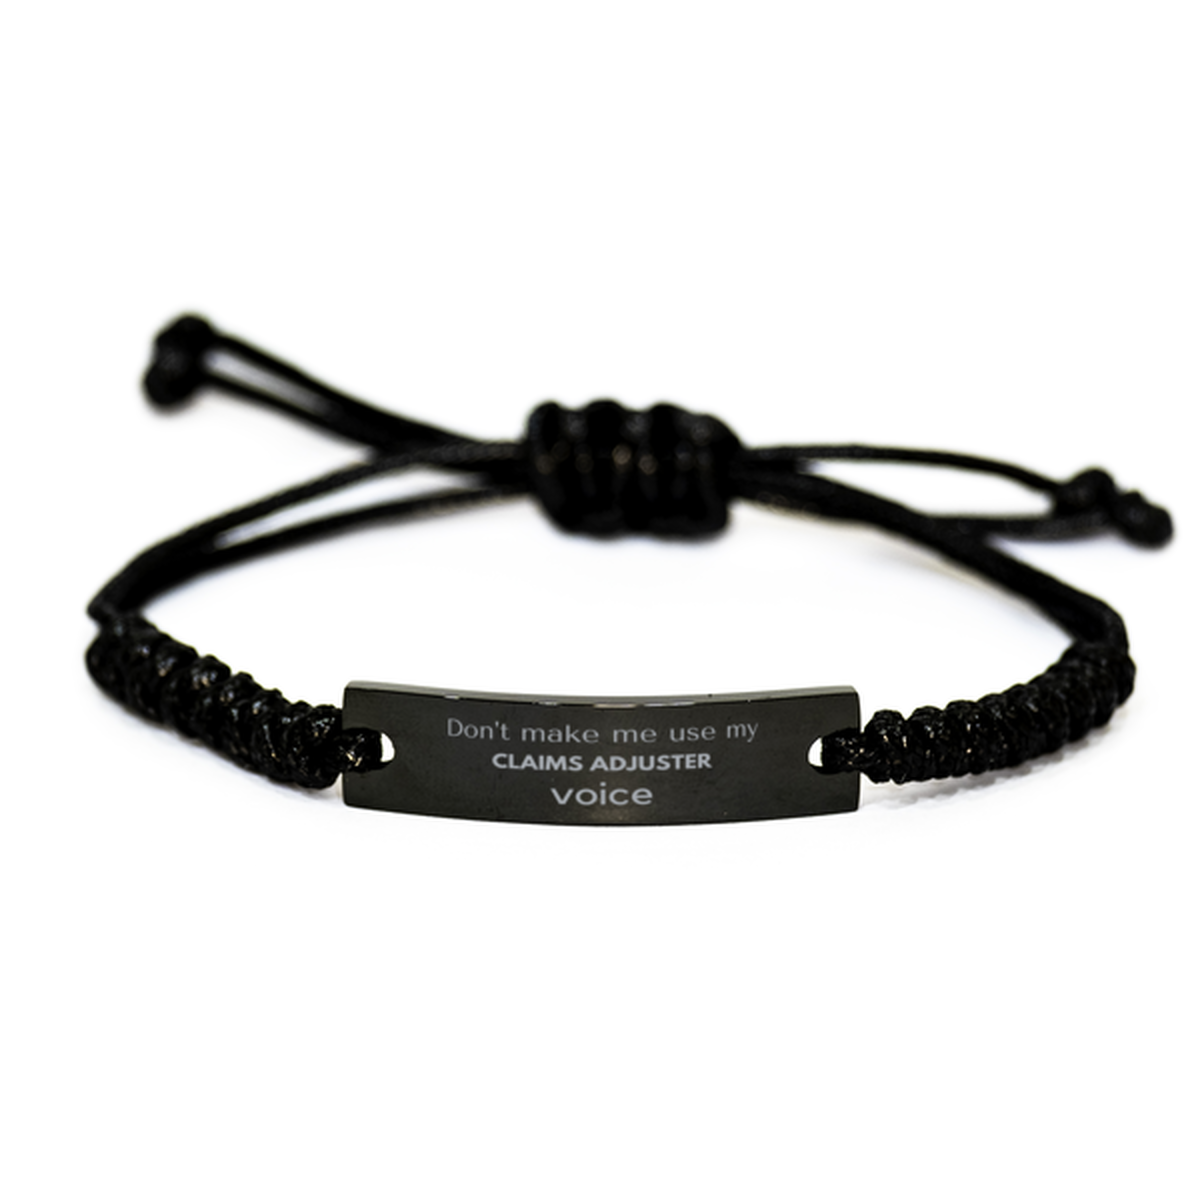 Don't make me use my Claims Adjuster voice, Sarcasm Claims Adjuster Gifts, Christmas Claims Adjuster Black Rope Bracelet Birthday Unique Gifts For Claims Adjuster Coworkers, Men, Women, Colleague, Friends